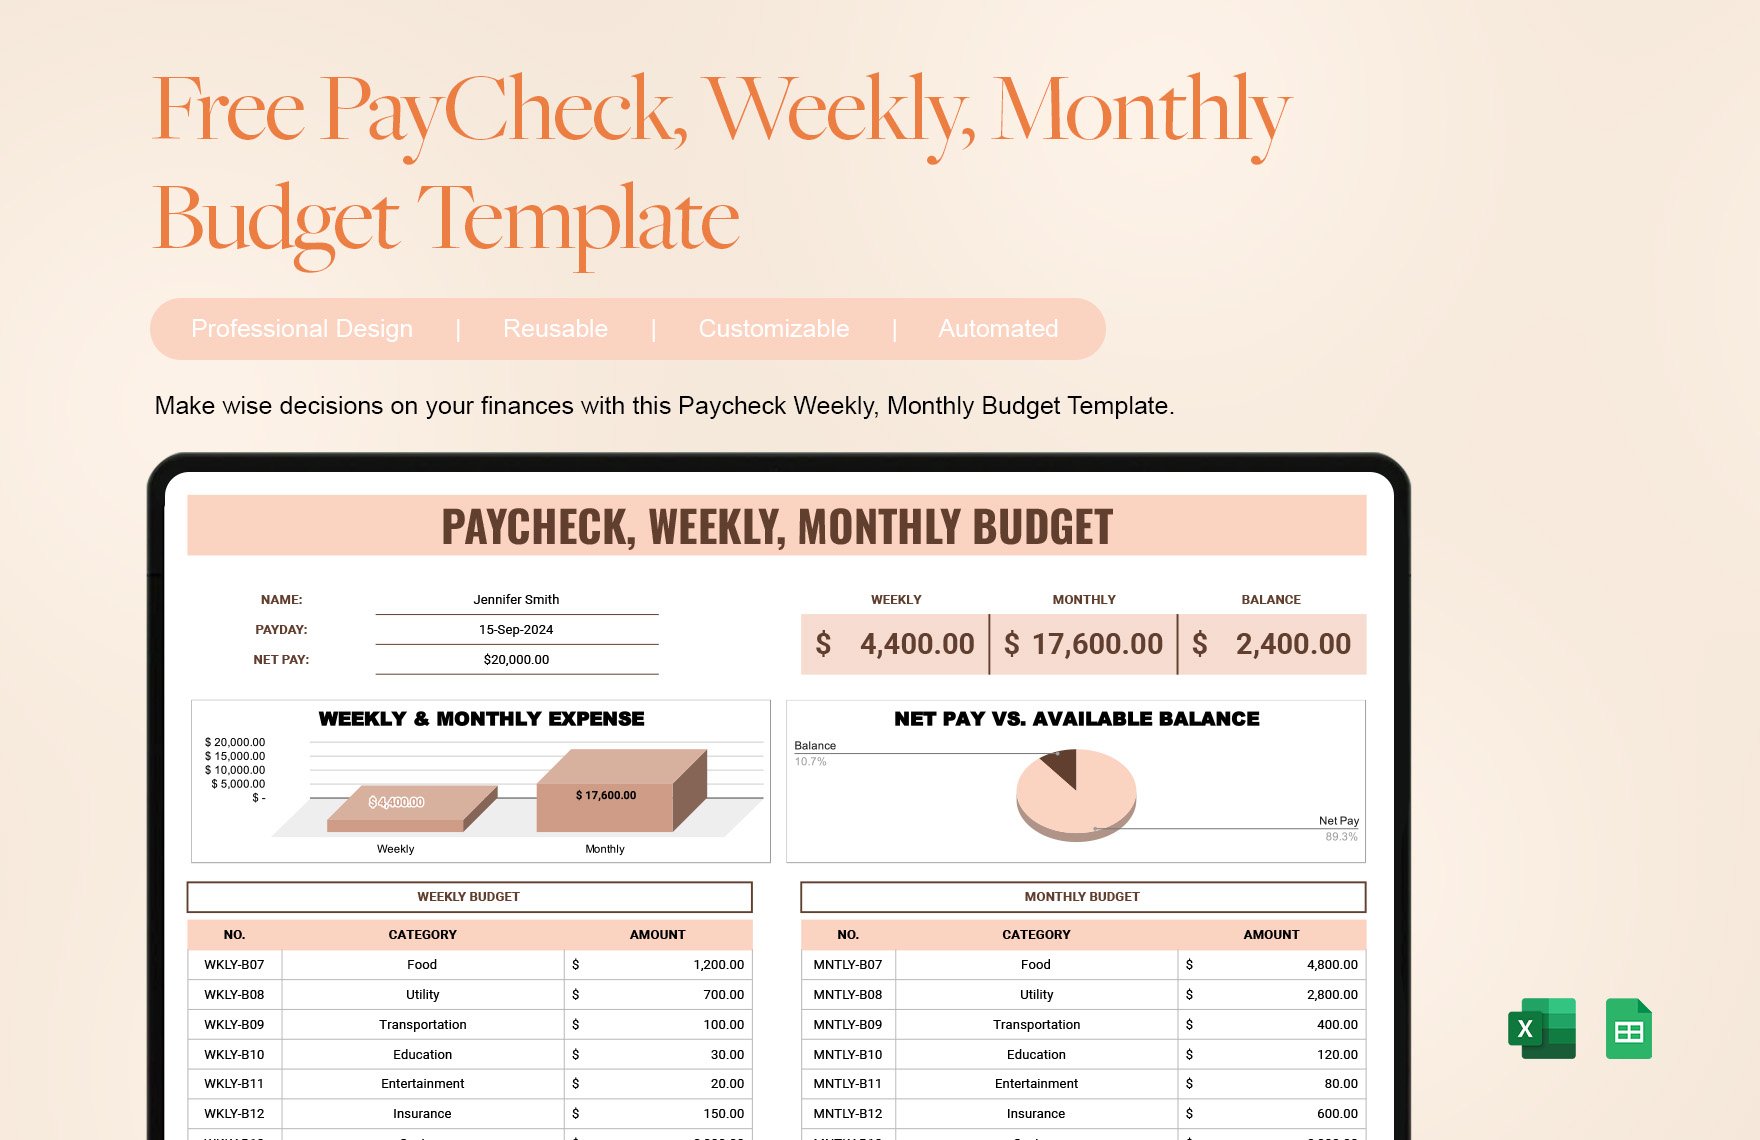 Free PayCheck, Weekly, Monthly Budget Template